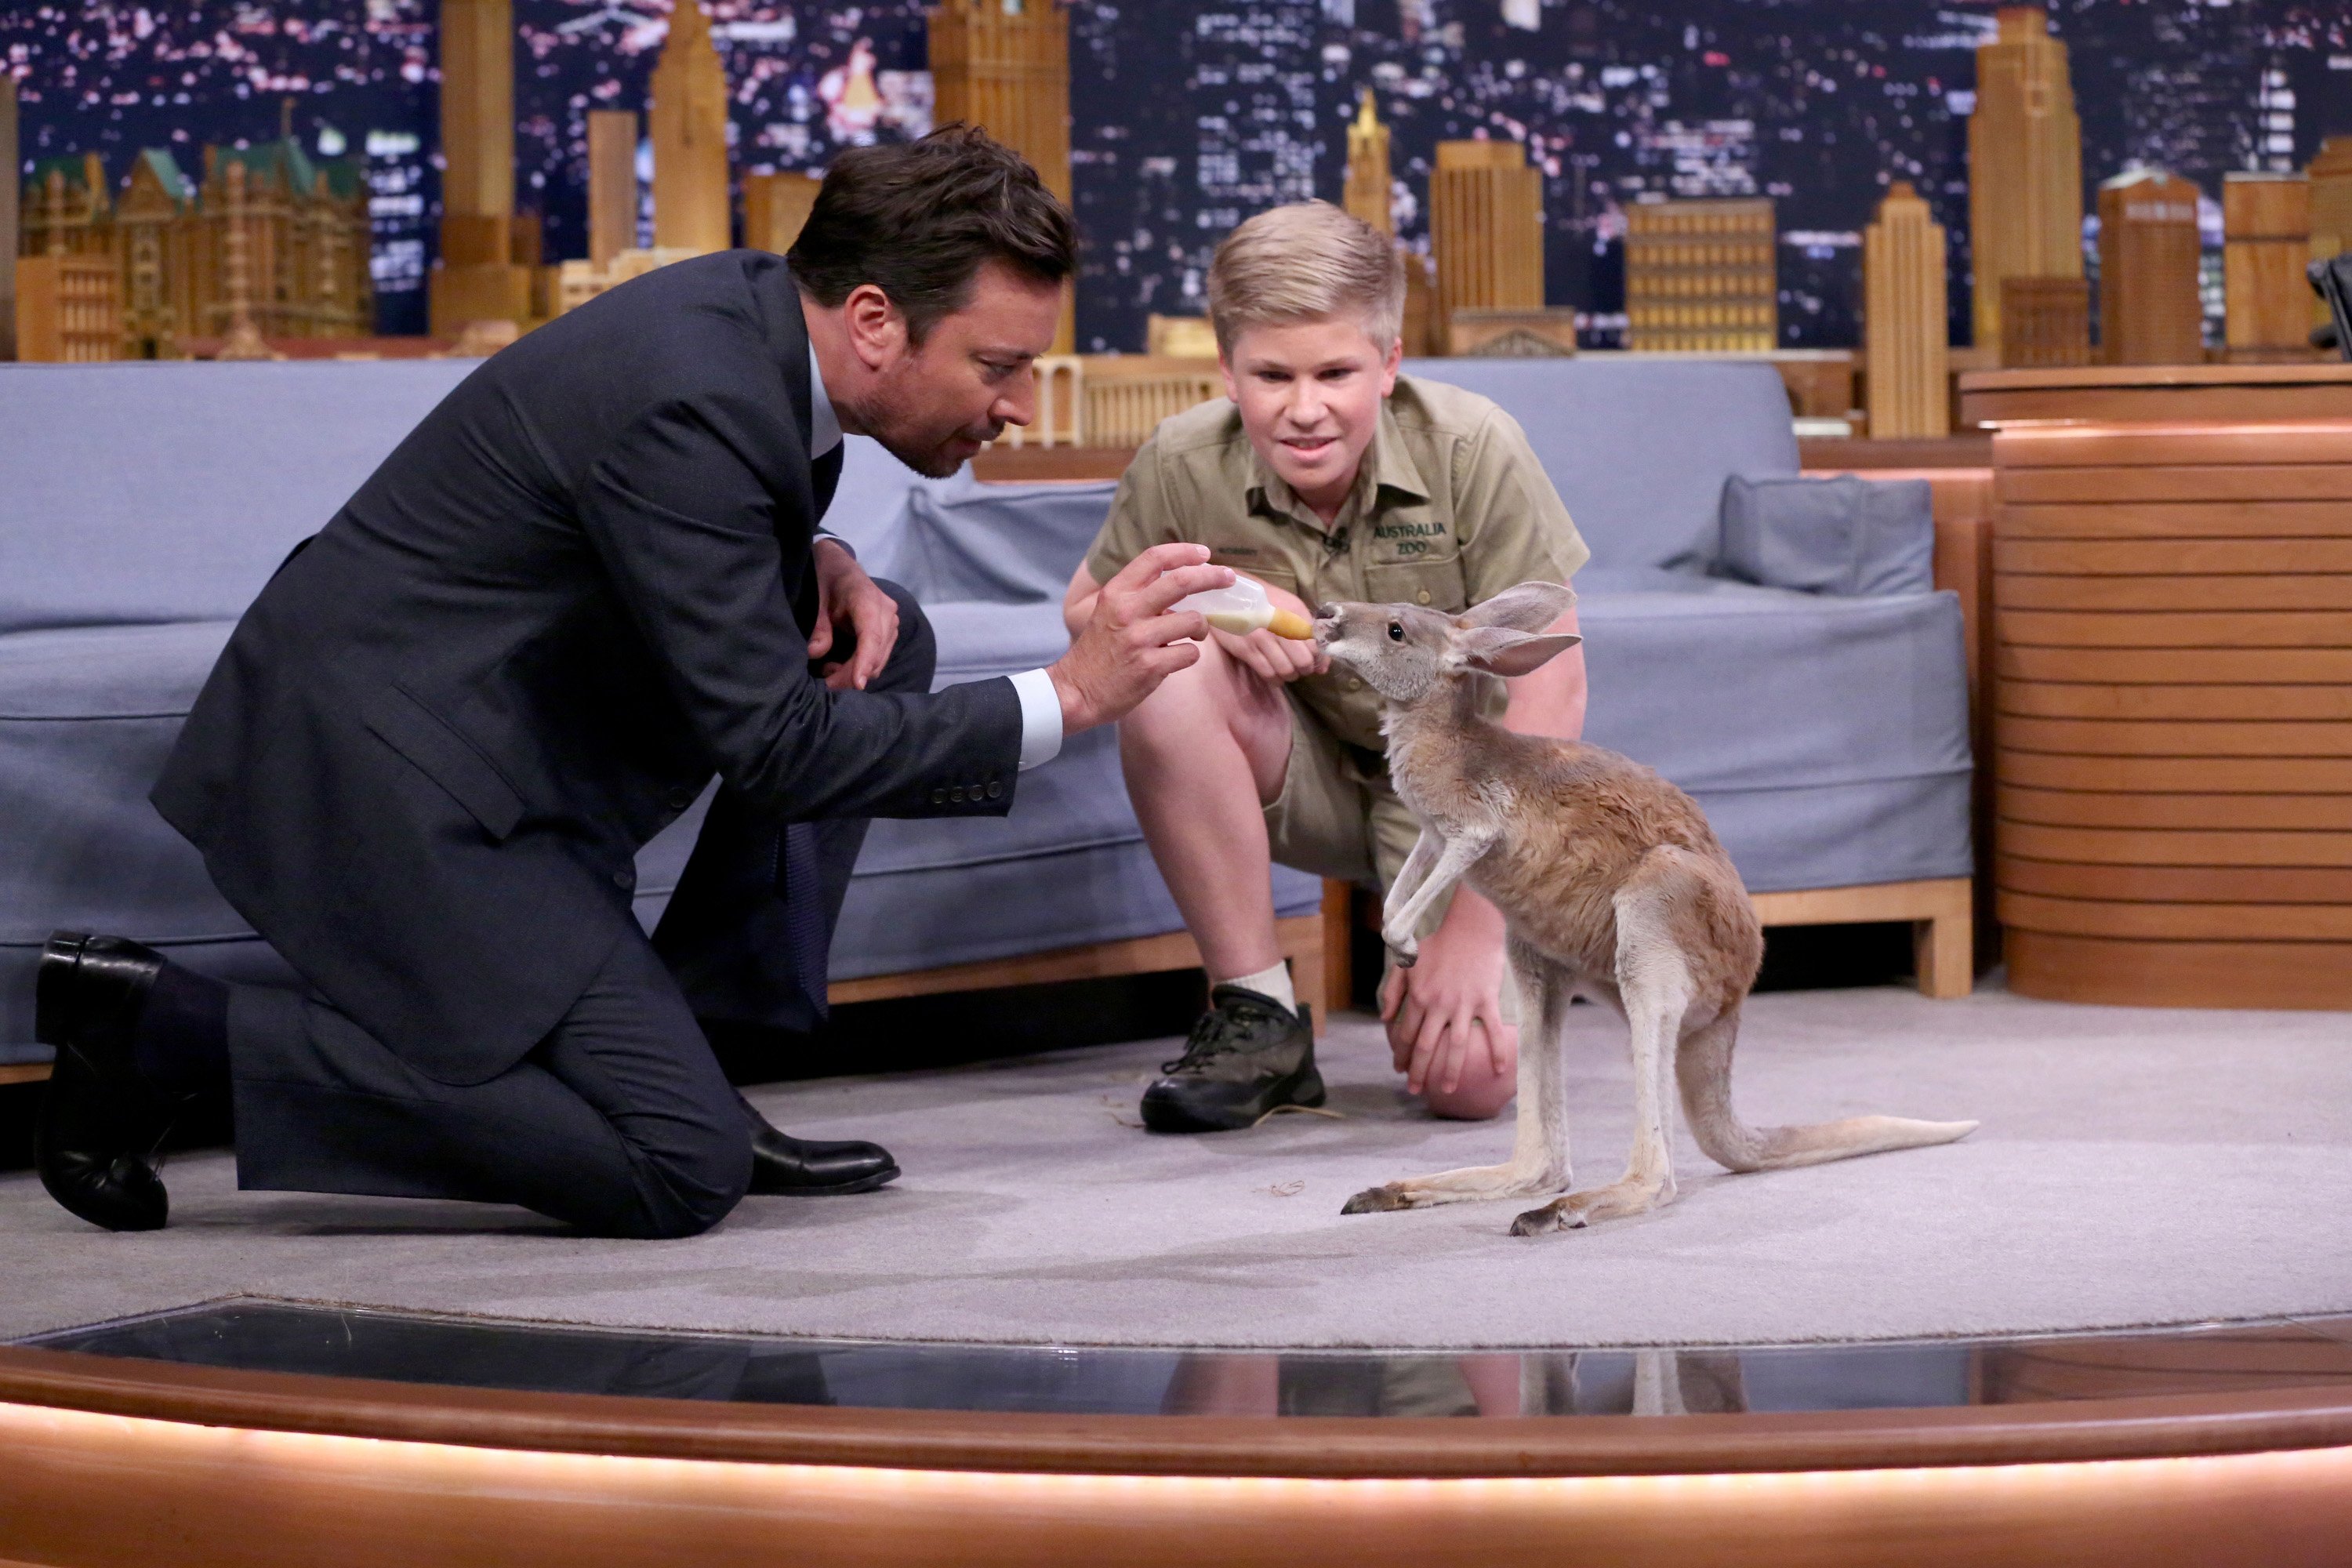 Animal expert Robert Irwin with host Jimmy Fallon during an interview with on June 7, 2017| Photo: Getty images